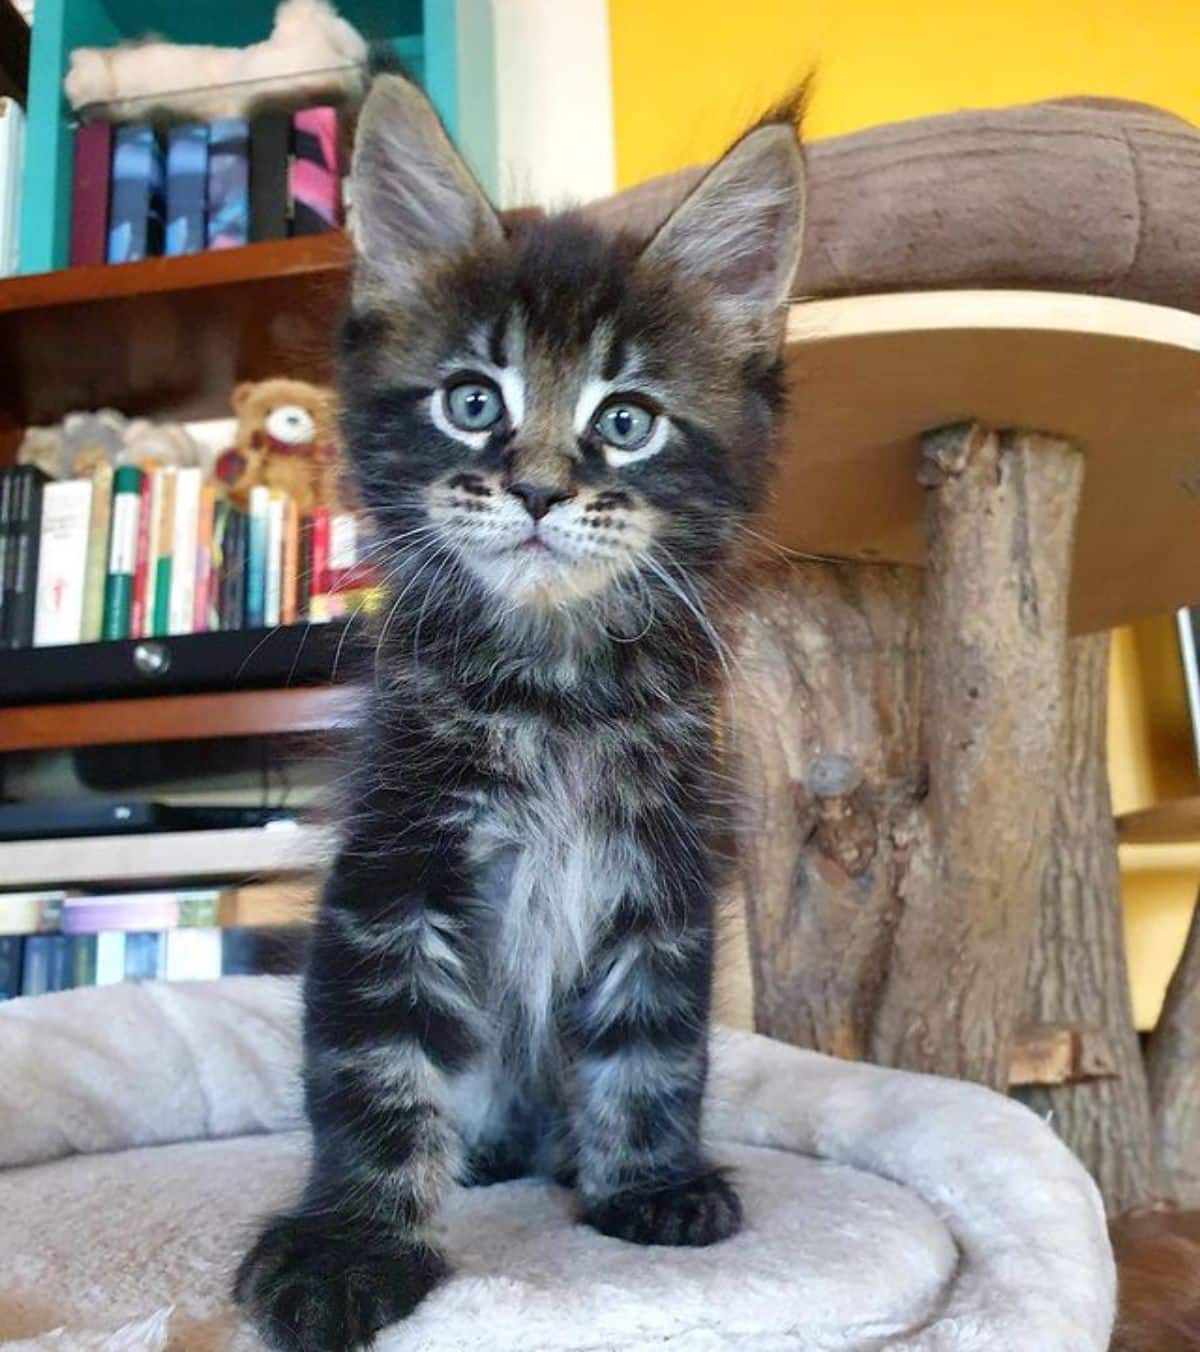 A tabby maine coon kitten standing in a cat bed.